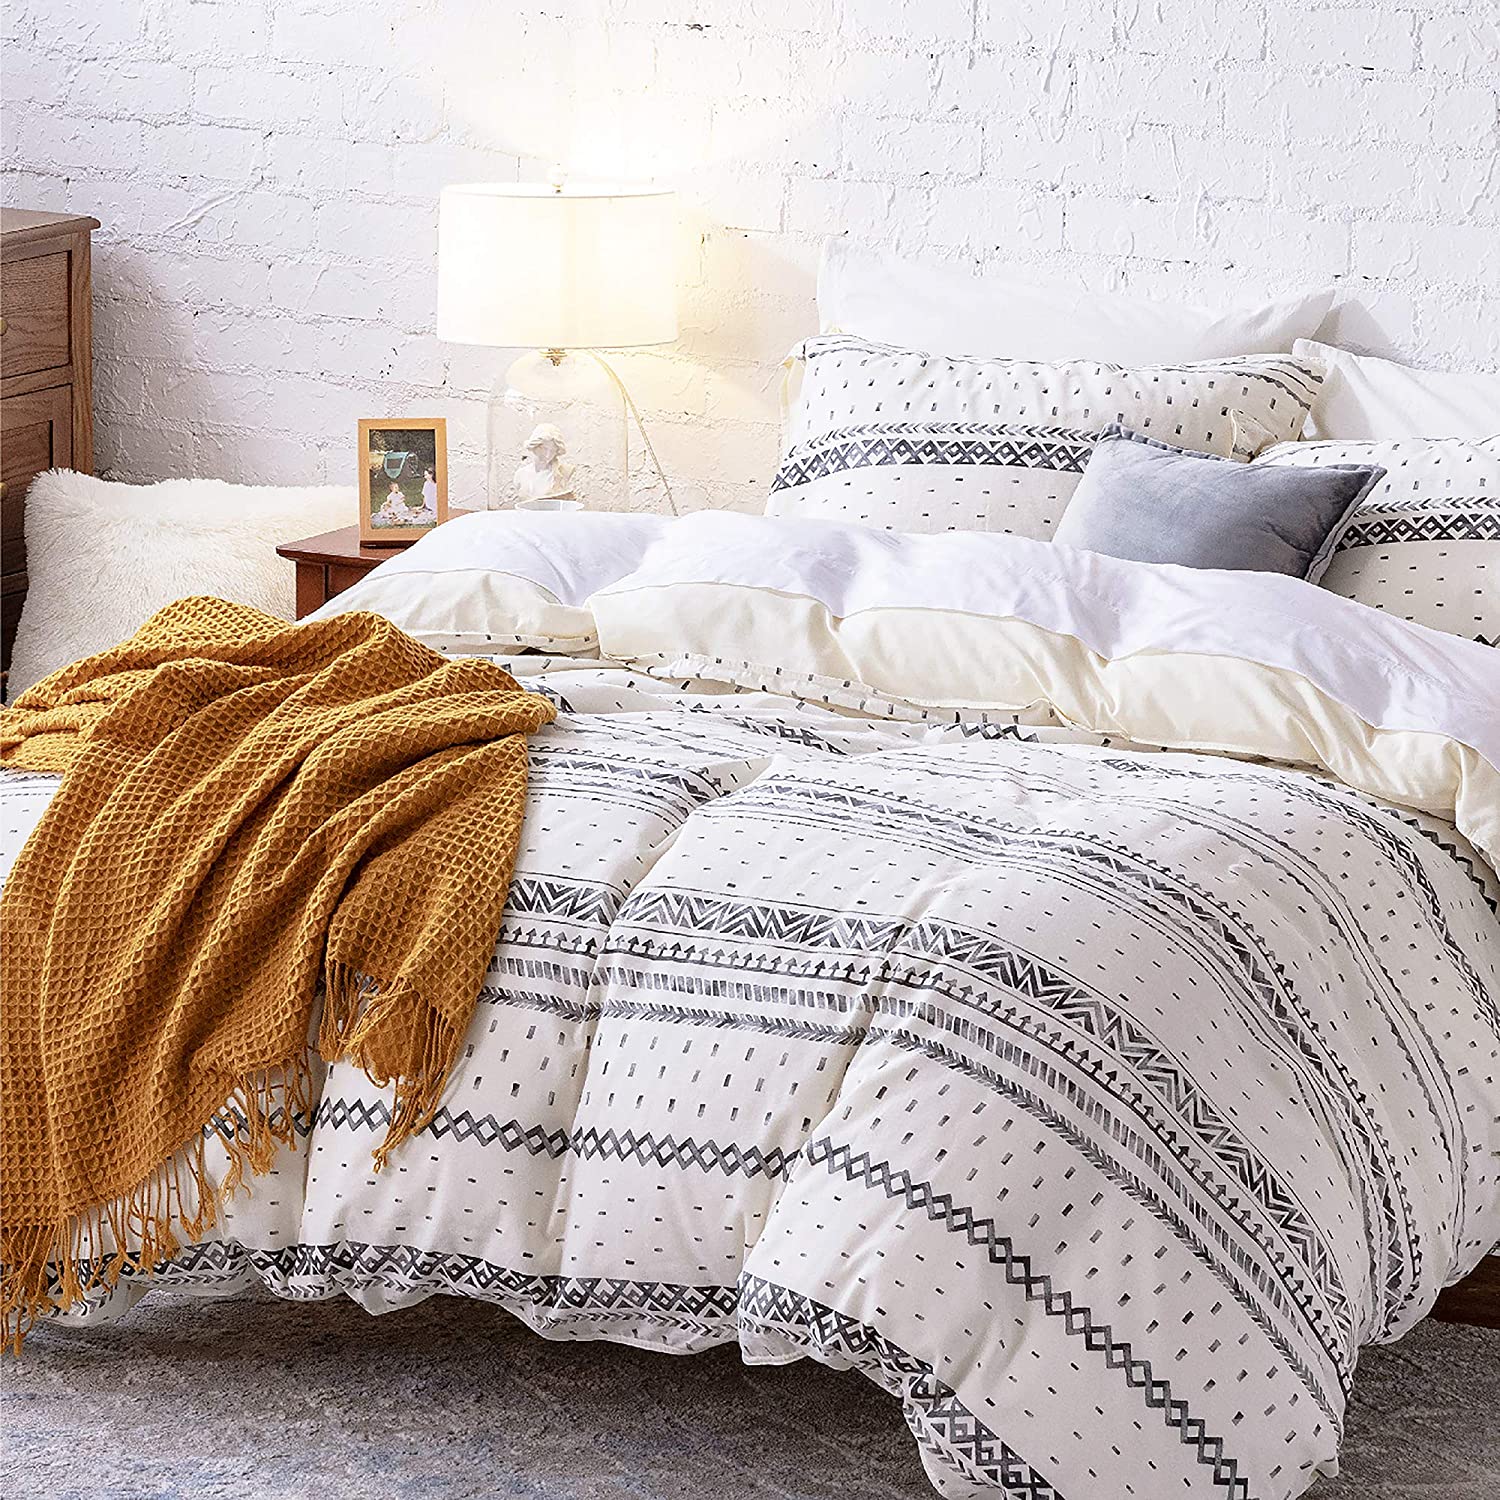 Price:$52.99  80% Cotton 20% Linen Duvet Cover Set, Washed Cotton Queen Comforter Cover, 3 Pieces Breathable Lightweight Geometric Duvet Cover Sets (Full/Queen, 90x90 inches, White/Black) : Home & Kitchen